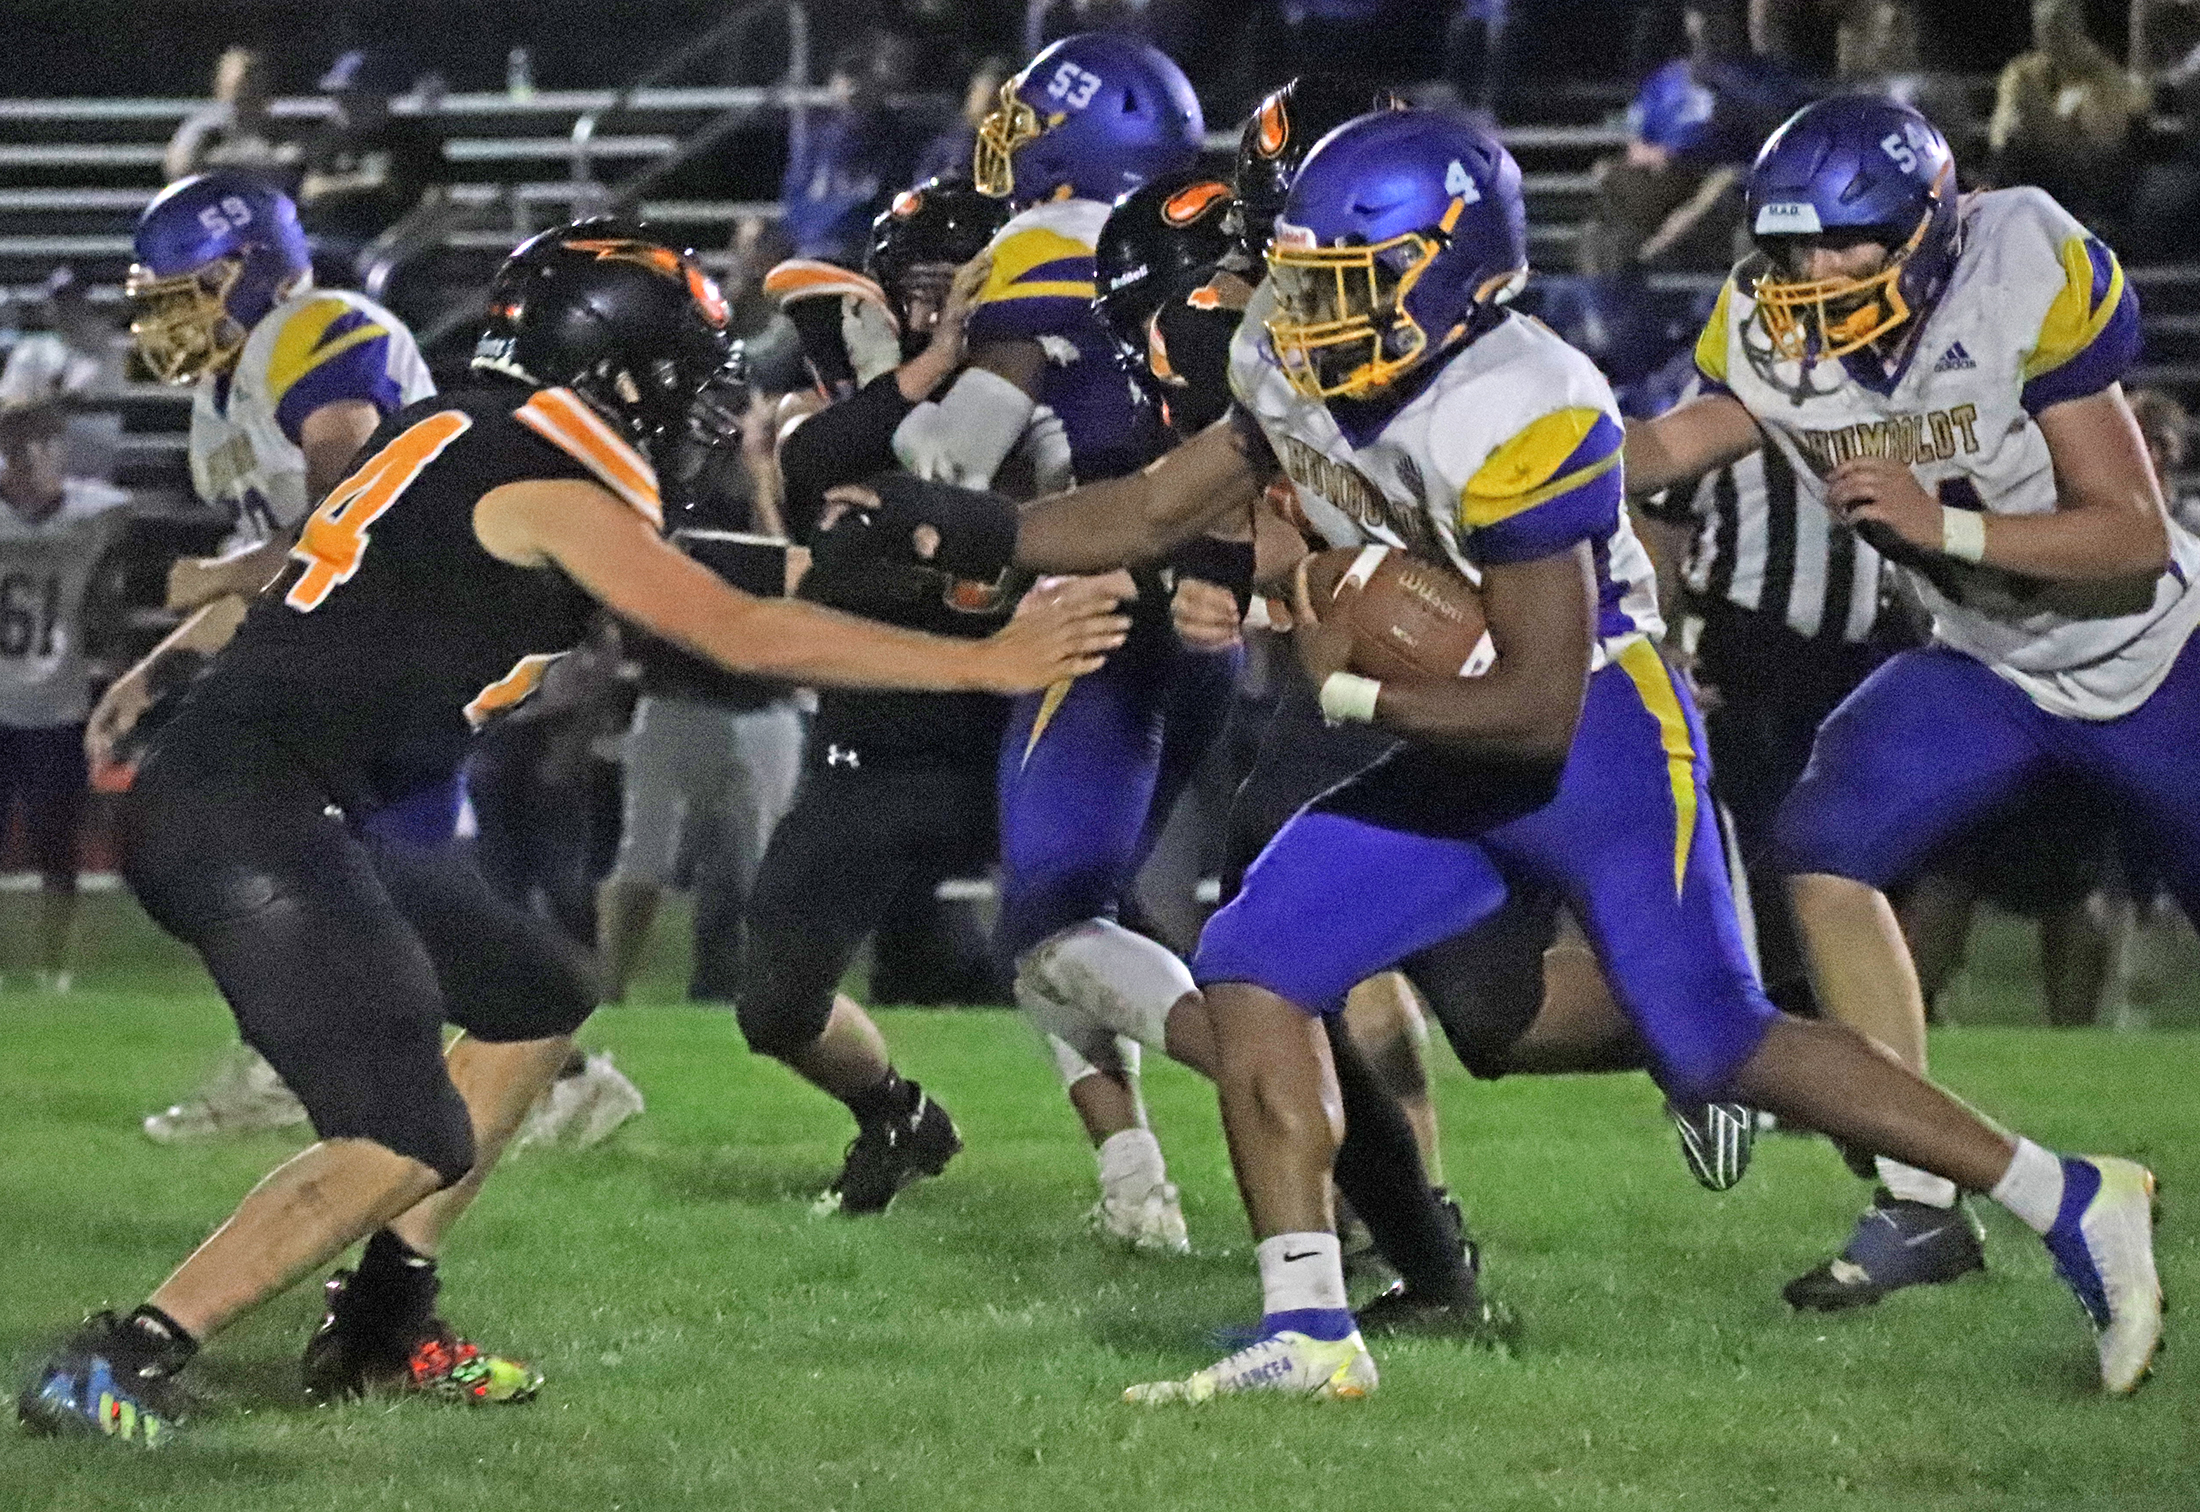 Wildcats strike early in 35-9 win over Comets